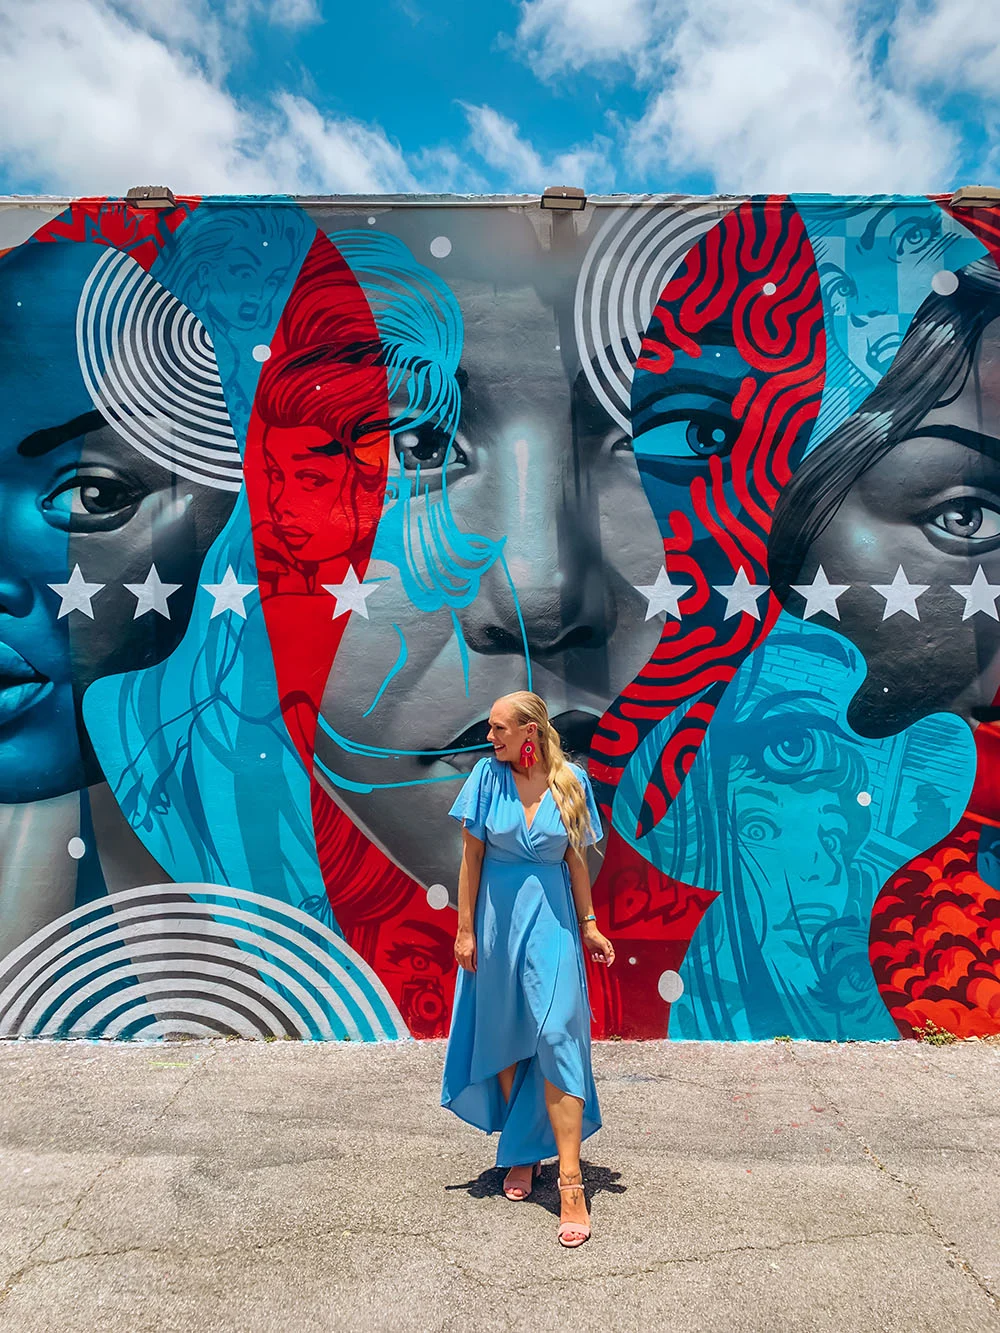 So you've planned a wonderful 4 day trip to Miami and now you're looking for the perfect itinerary for your visit… well, this guide is for you! I’ve put together the ultimate 4 days in Miami itinerary that will have you seeing and experiencing all of Miami’s top sights and attractions. From South Beach to Little Havana, the Wynwood Arts District to the Everglades, and even a day trip to Key West! This really is the perfect 4 day itinerary to get the most out of your time in Miami. Pictured here: Wynwood Walls